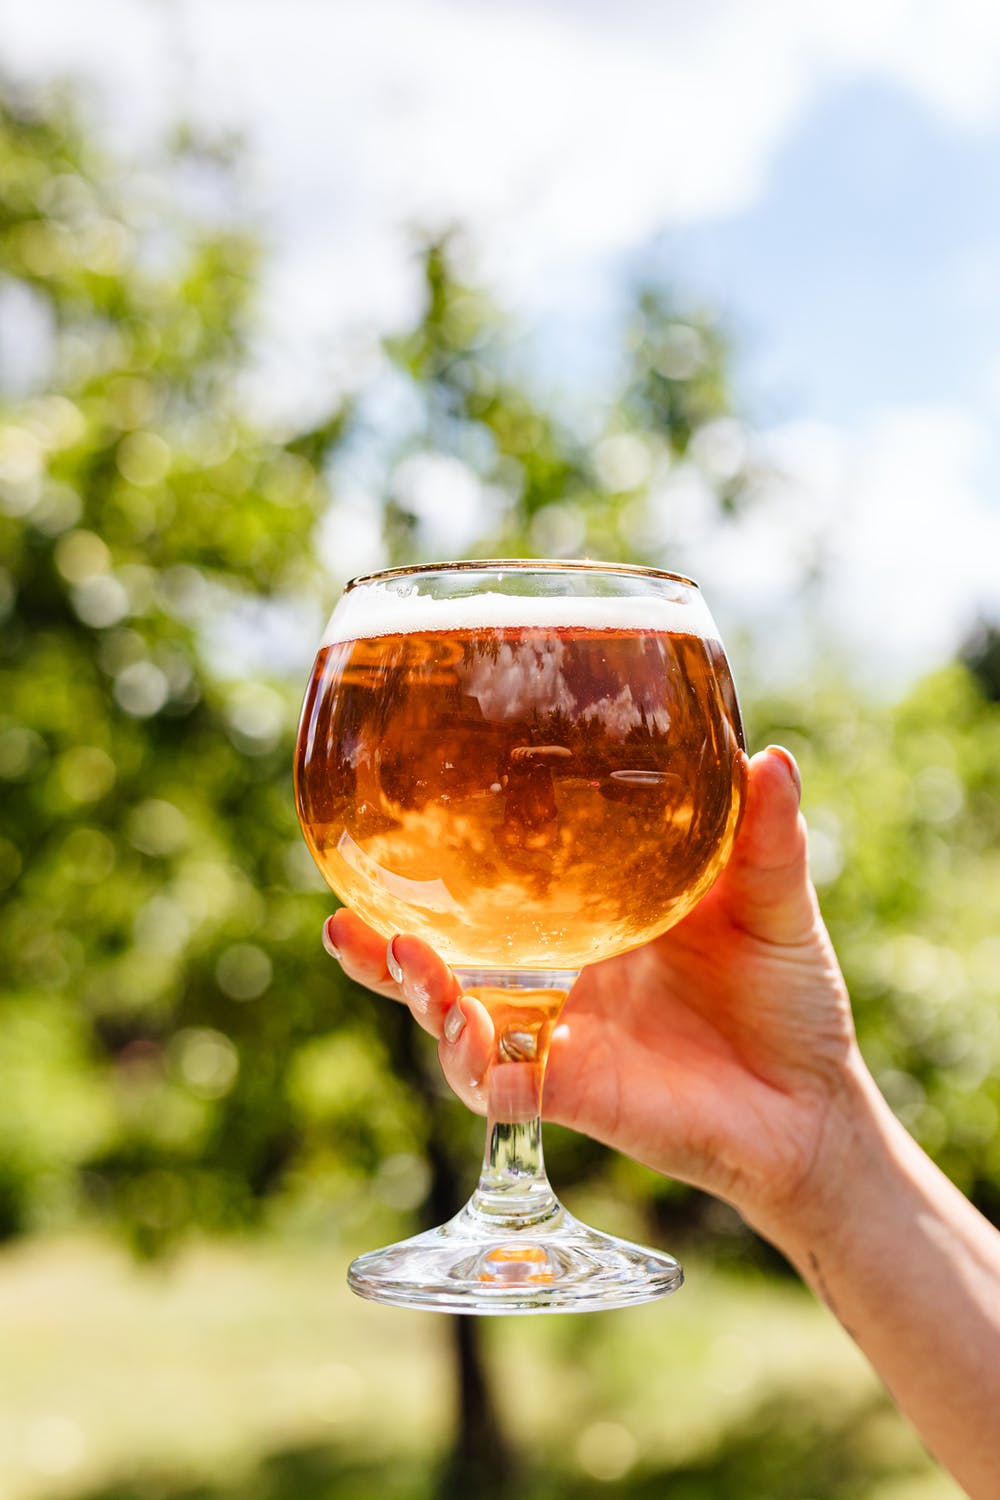 The Benefits of Investing in Home Brewing Products